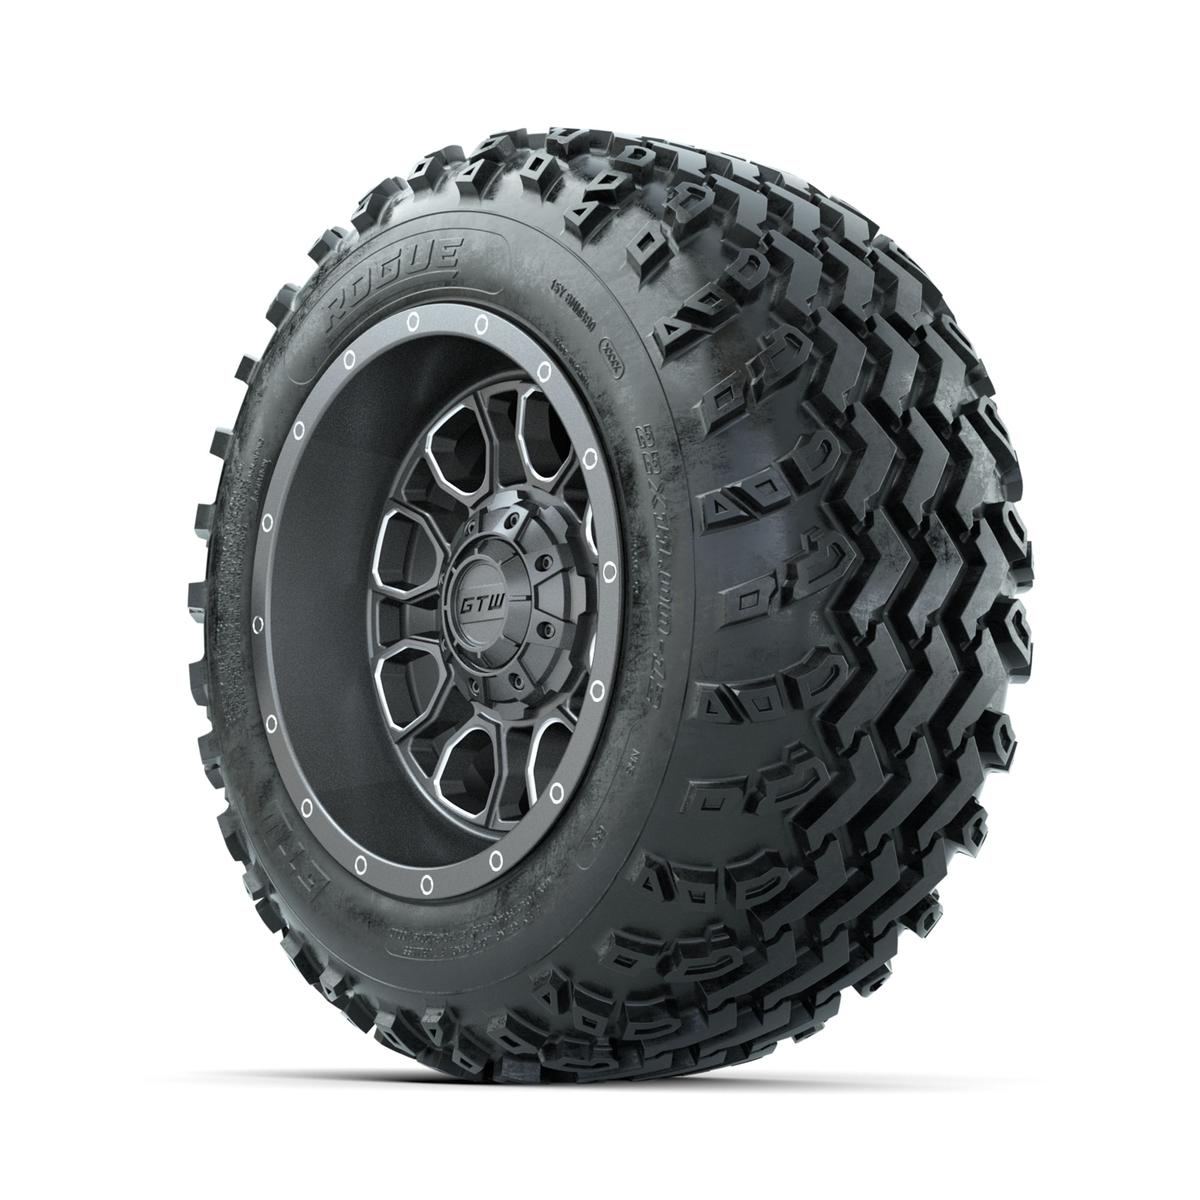 GTW Volt Gunmetal/Machined 12 in Wheels with 22x11.00-12 Rogue All Terrain Tires – Full Set